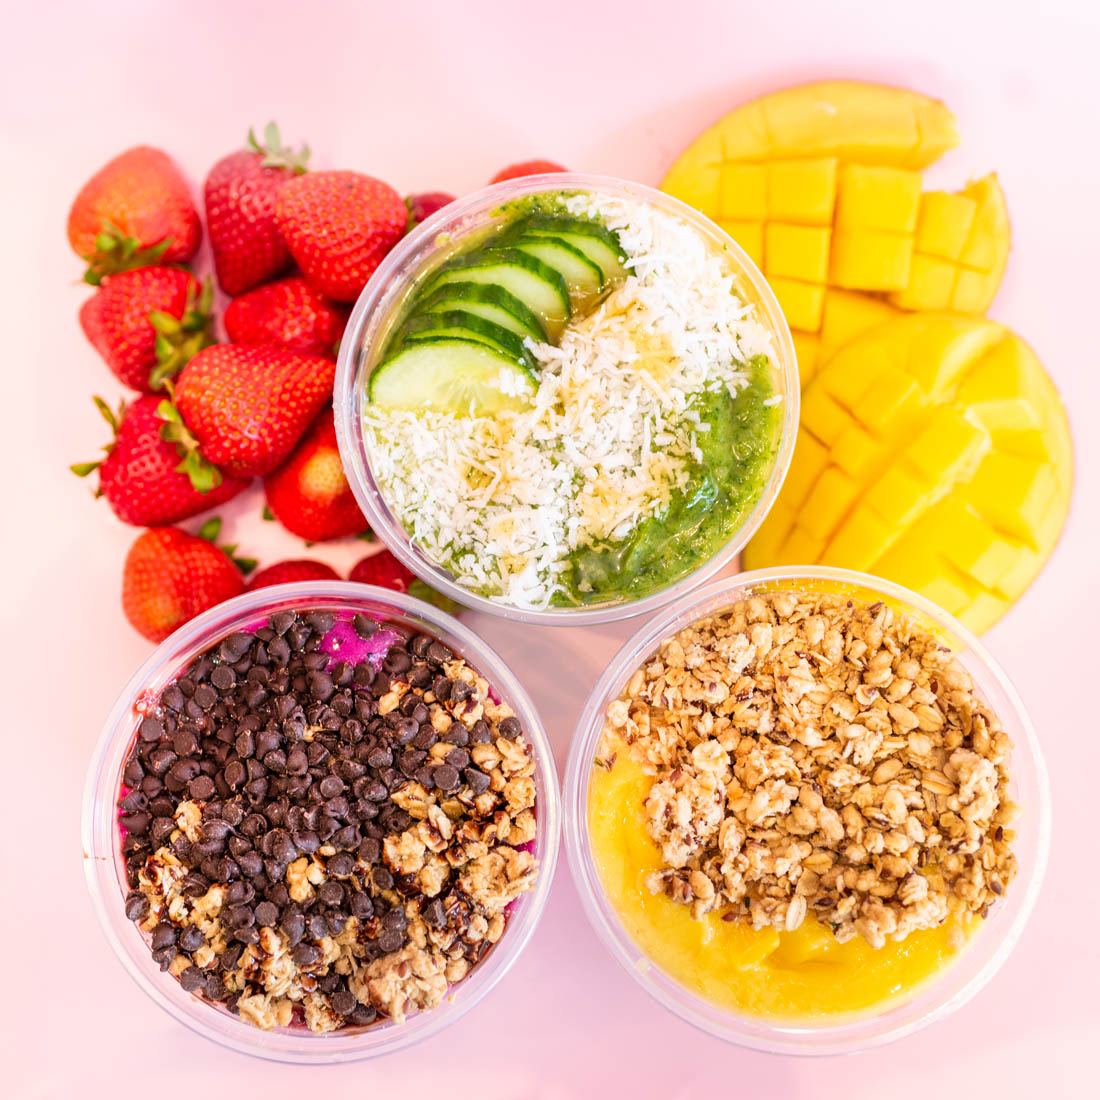 Rush Bowls smoothie bowls nutrition info in Denver.